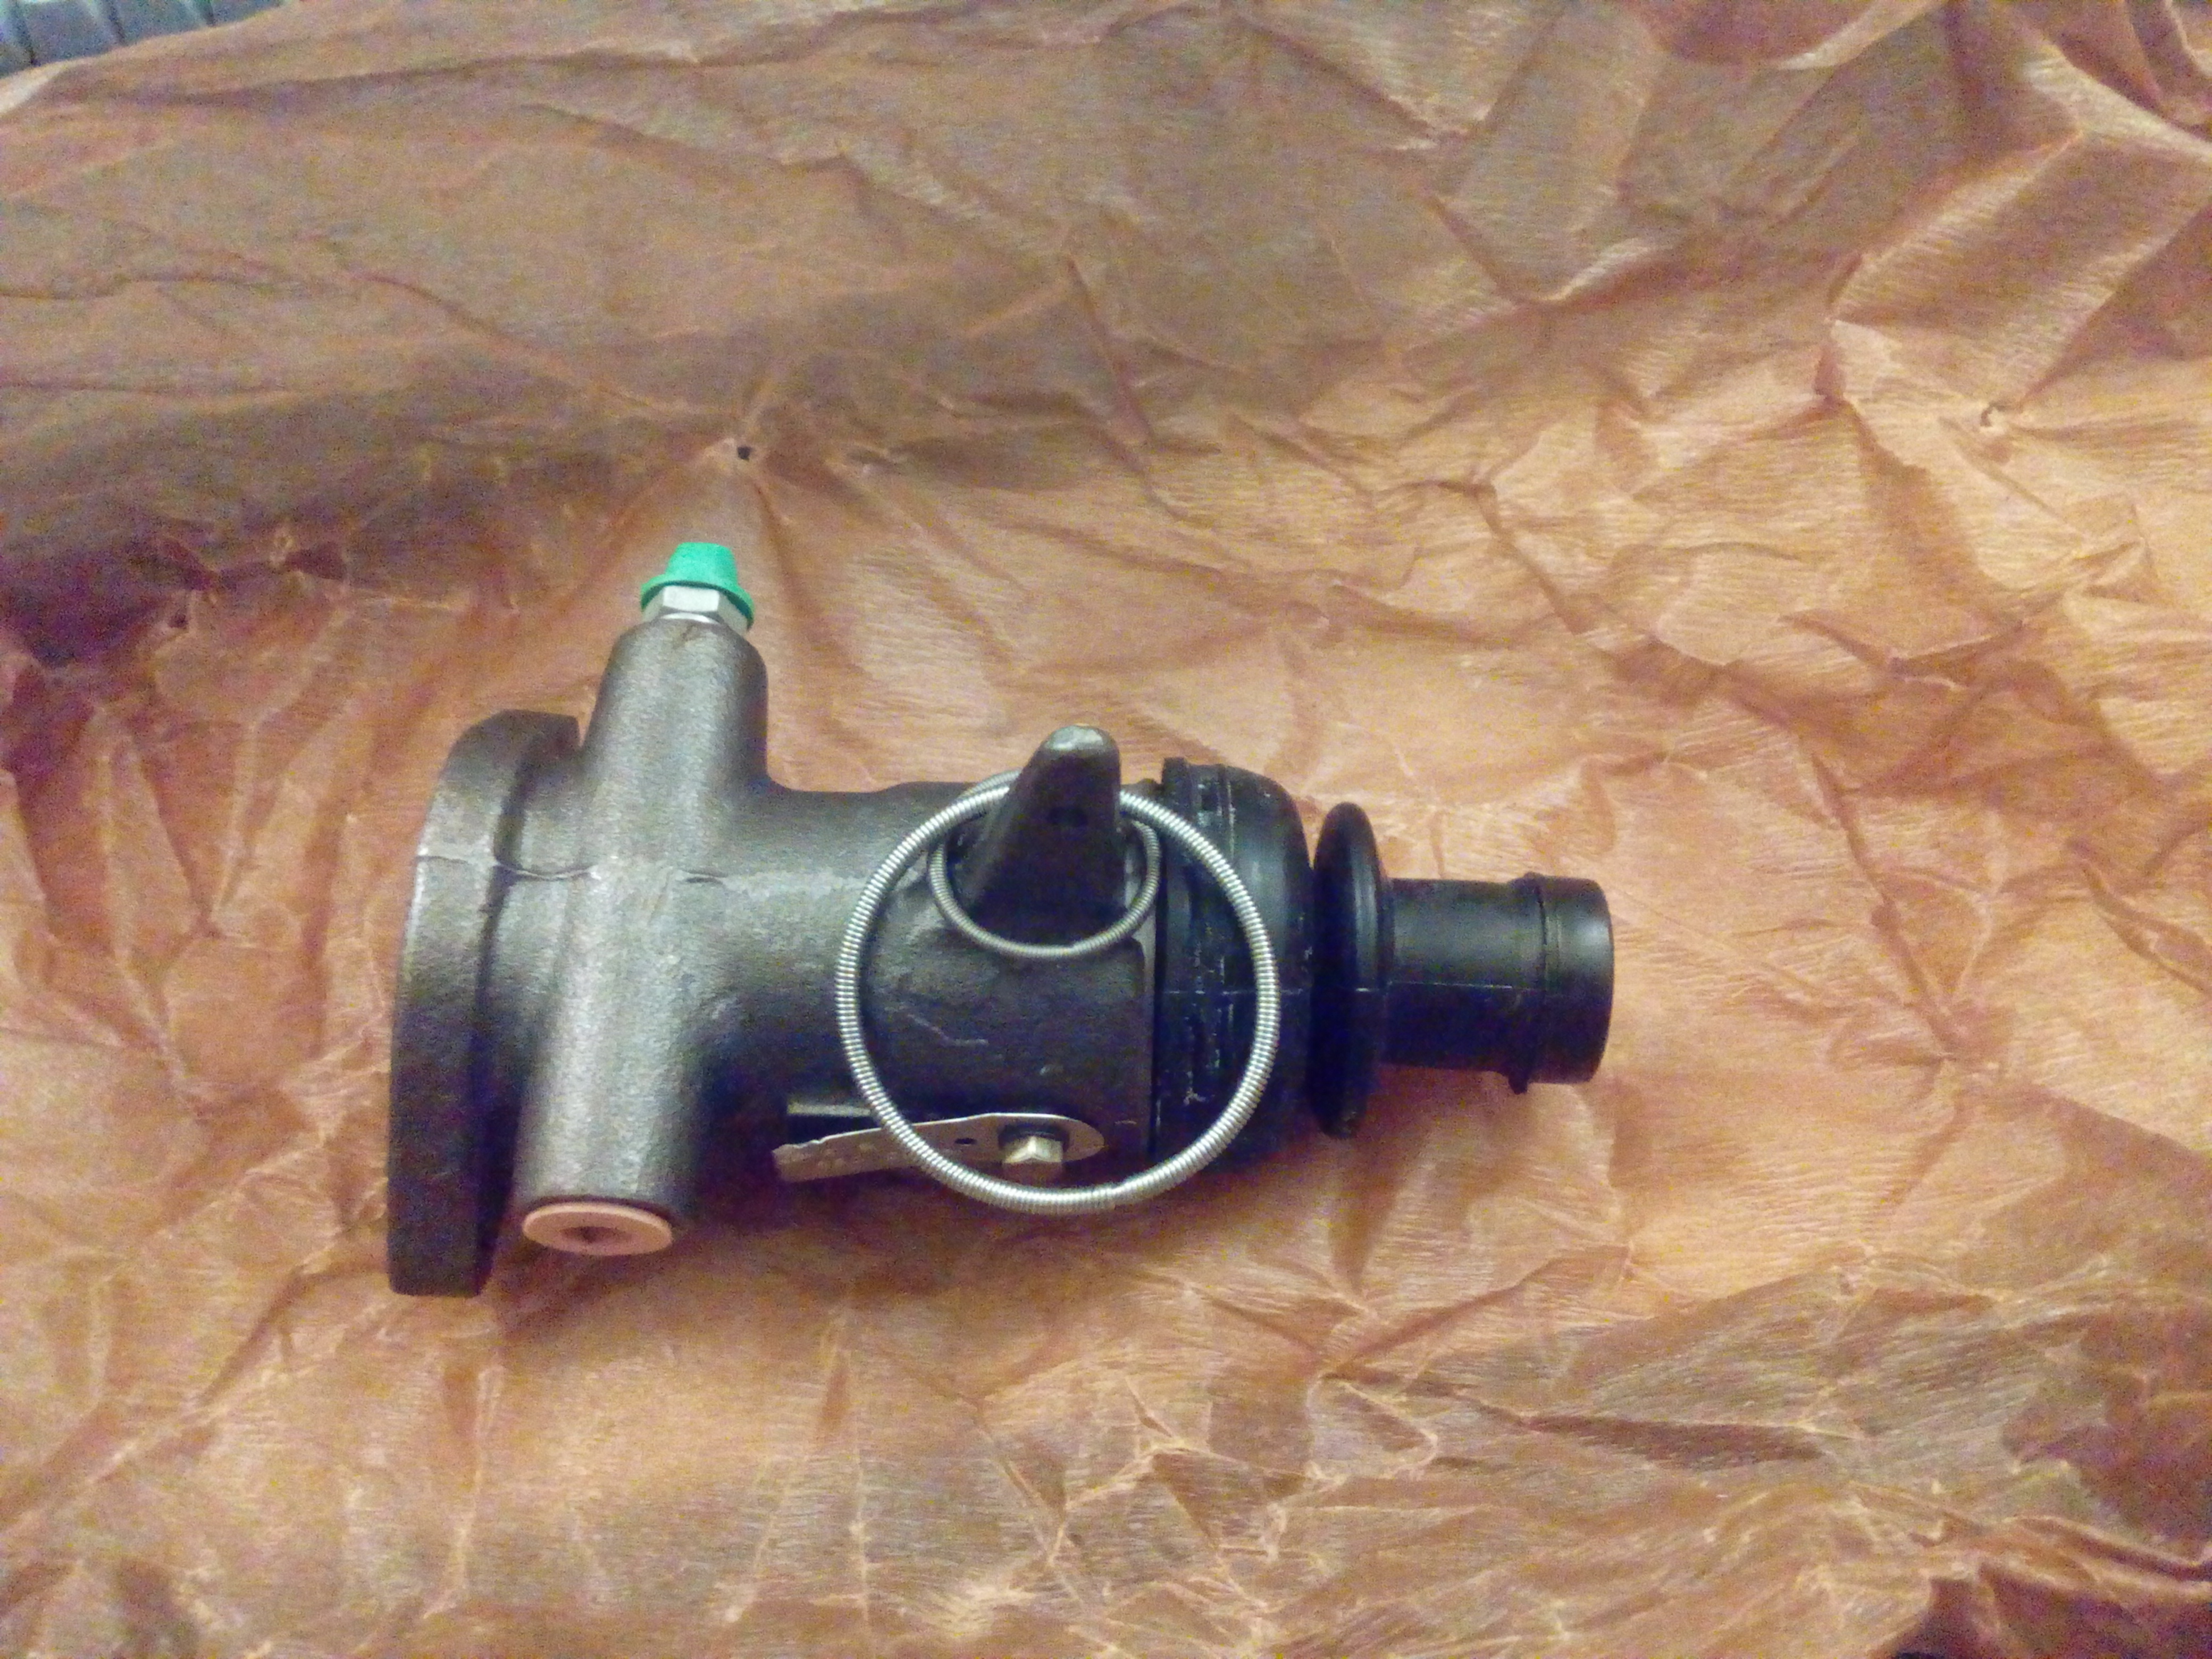 A transverse brake cylinder laying on unwrapped waxed
anti-corrosion paper. There are two spring retainers hanging off a
protrusion, that are meant to retain the rubber boot on the back.